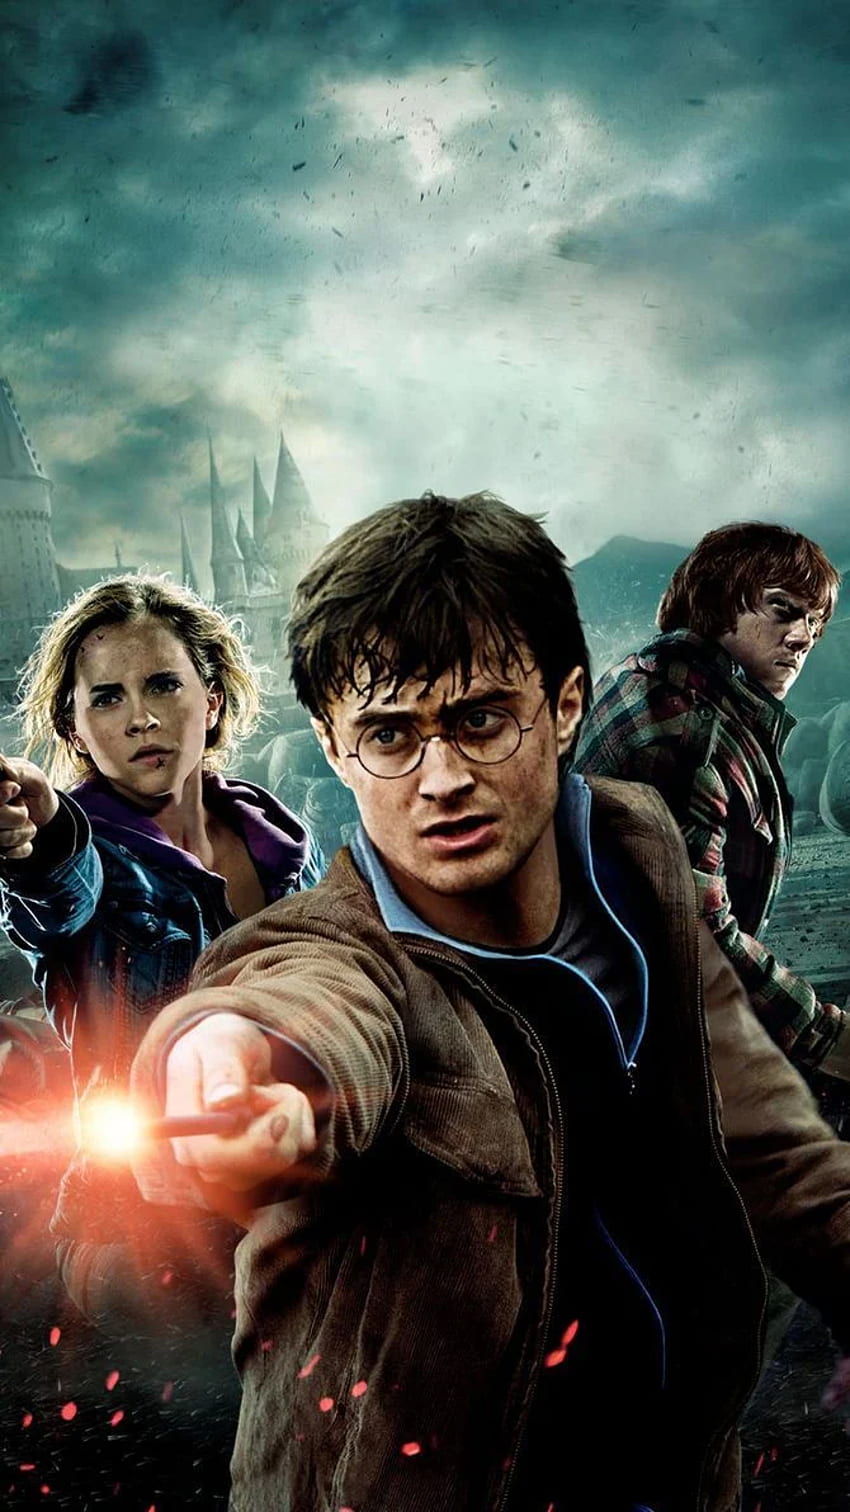 harry potter and the deathly hallows part 2 movie download free